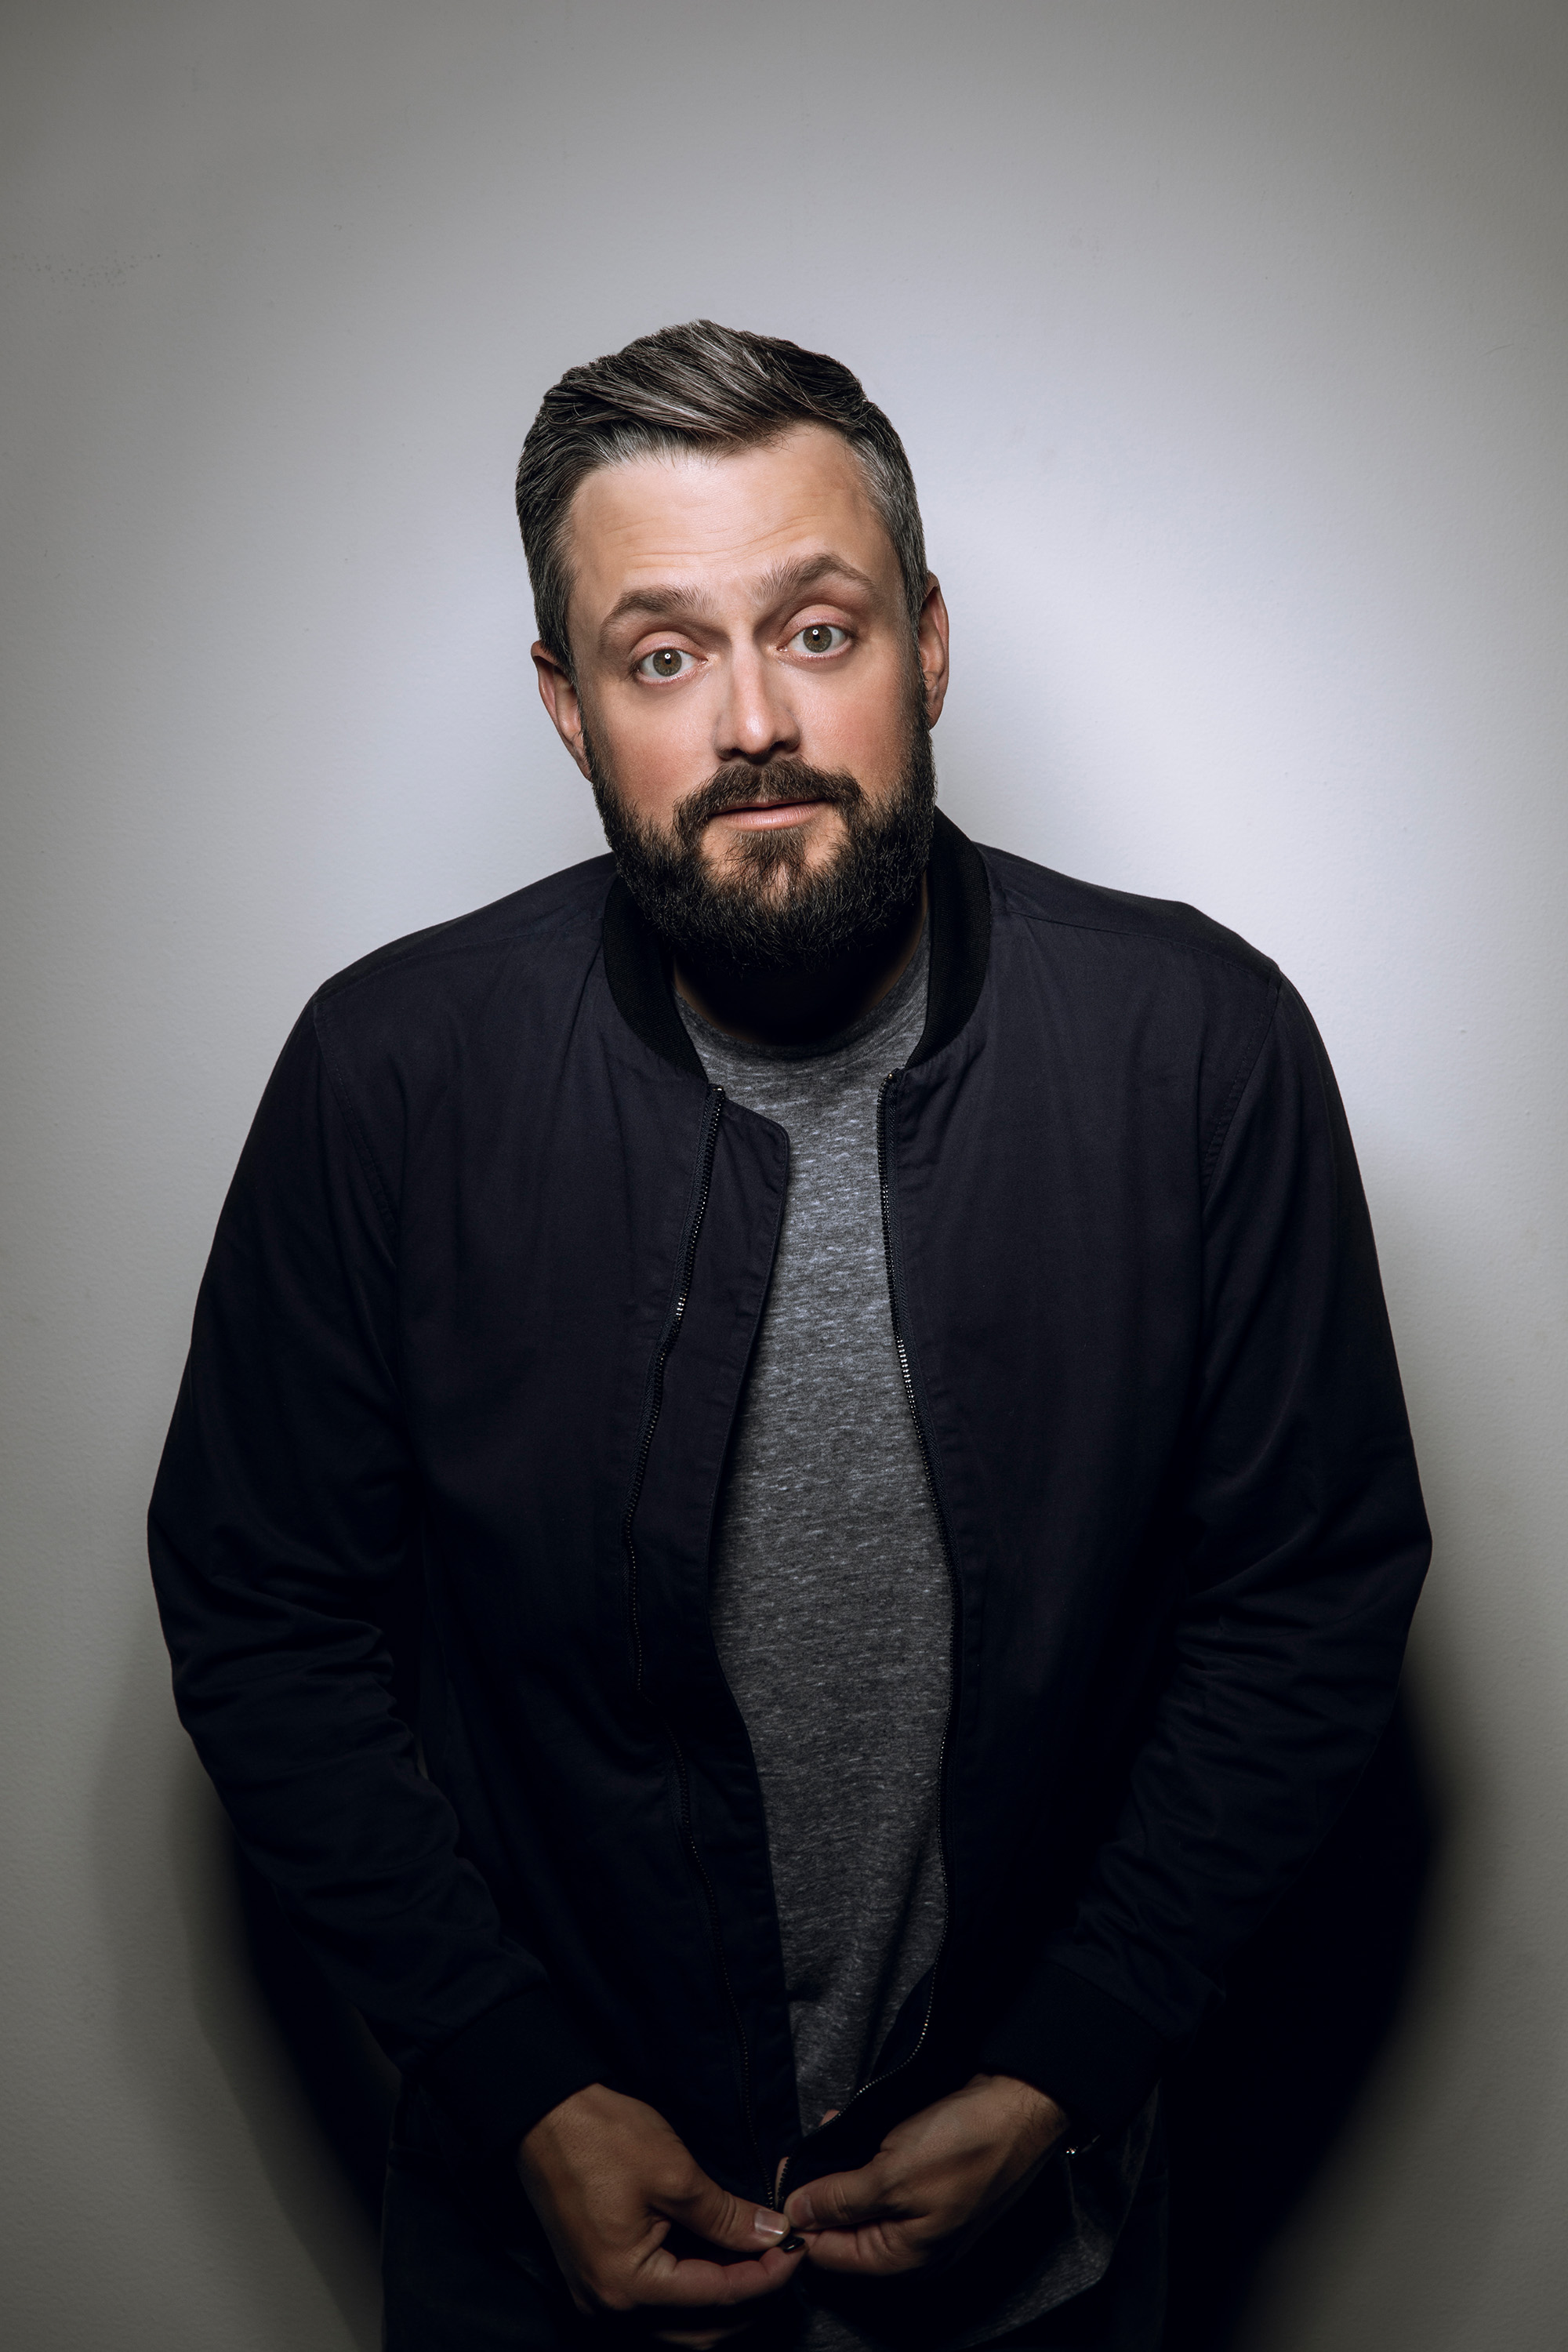 Comedian Nate Bargatze talks honking fans, his magic dad and clean